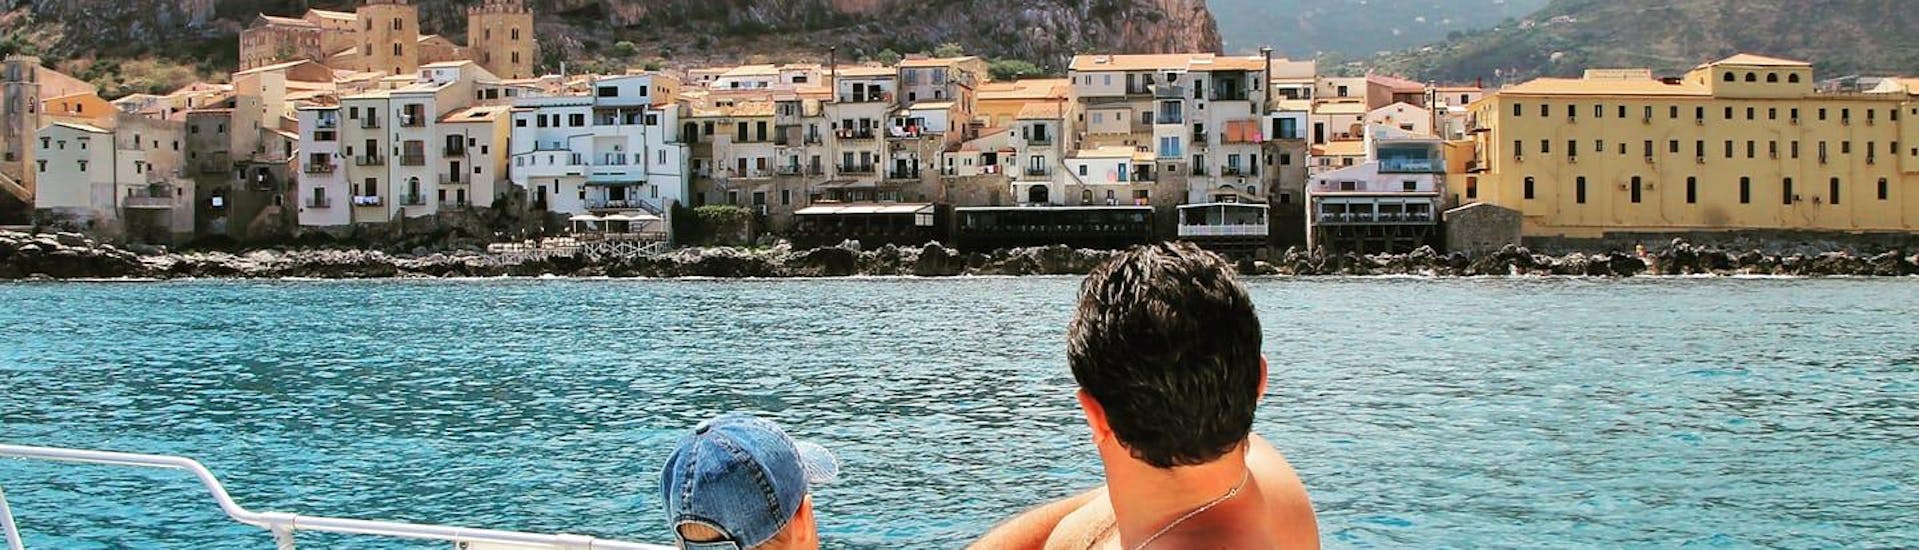 Boat Trip in Cefalù with Sightseeing, Swimming & Aperitif.